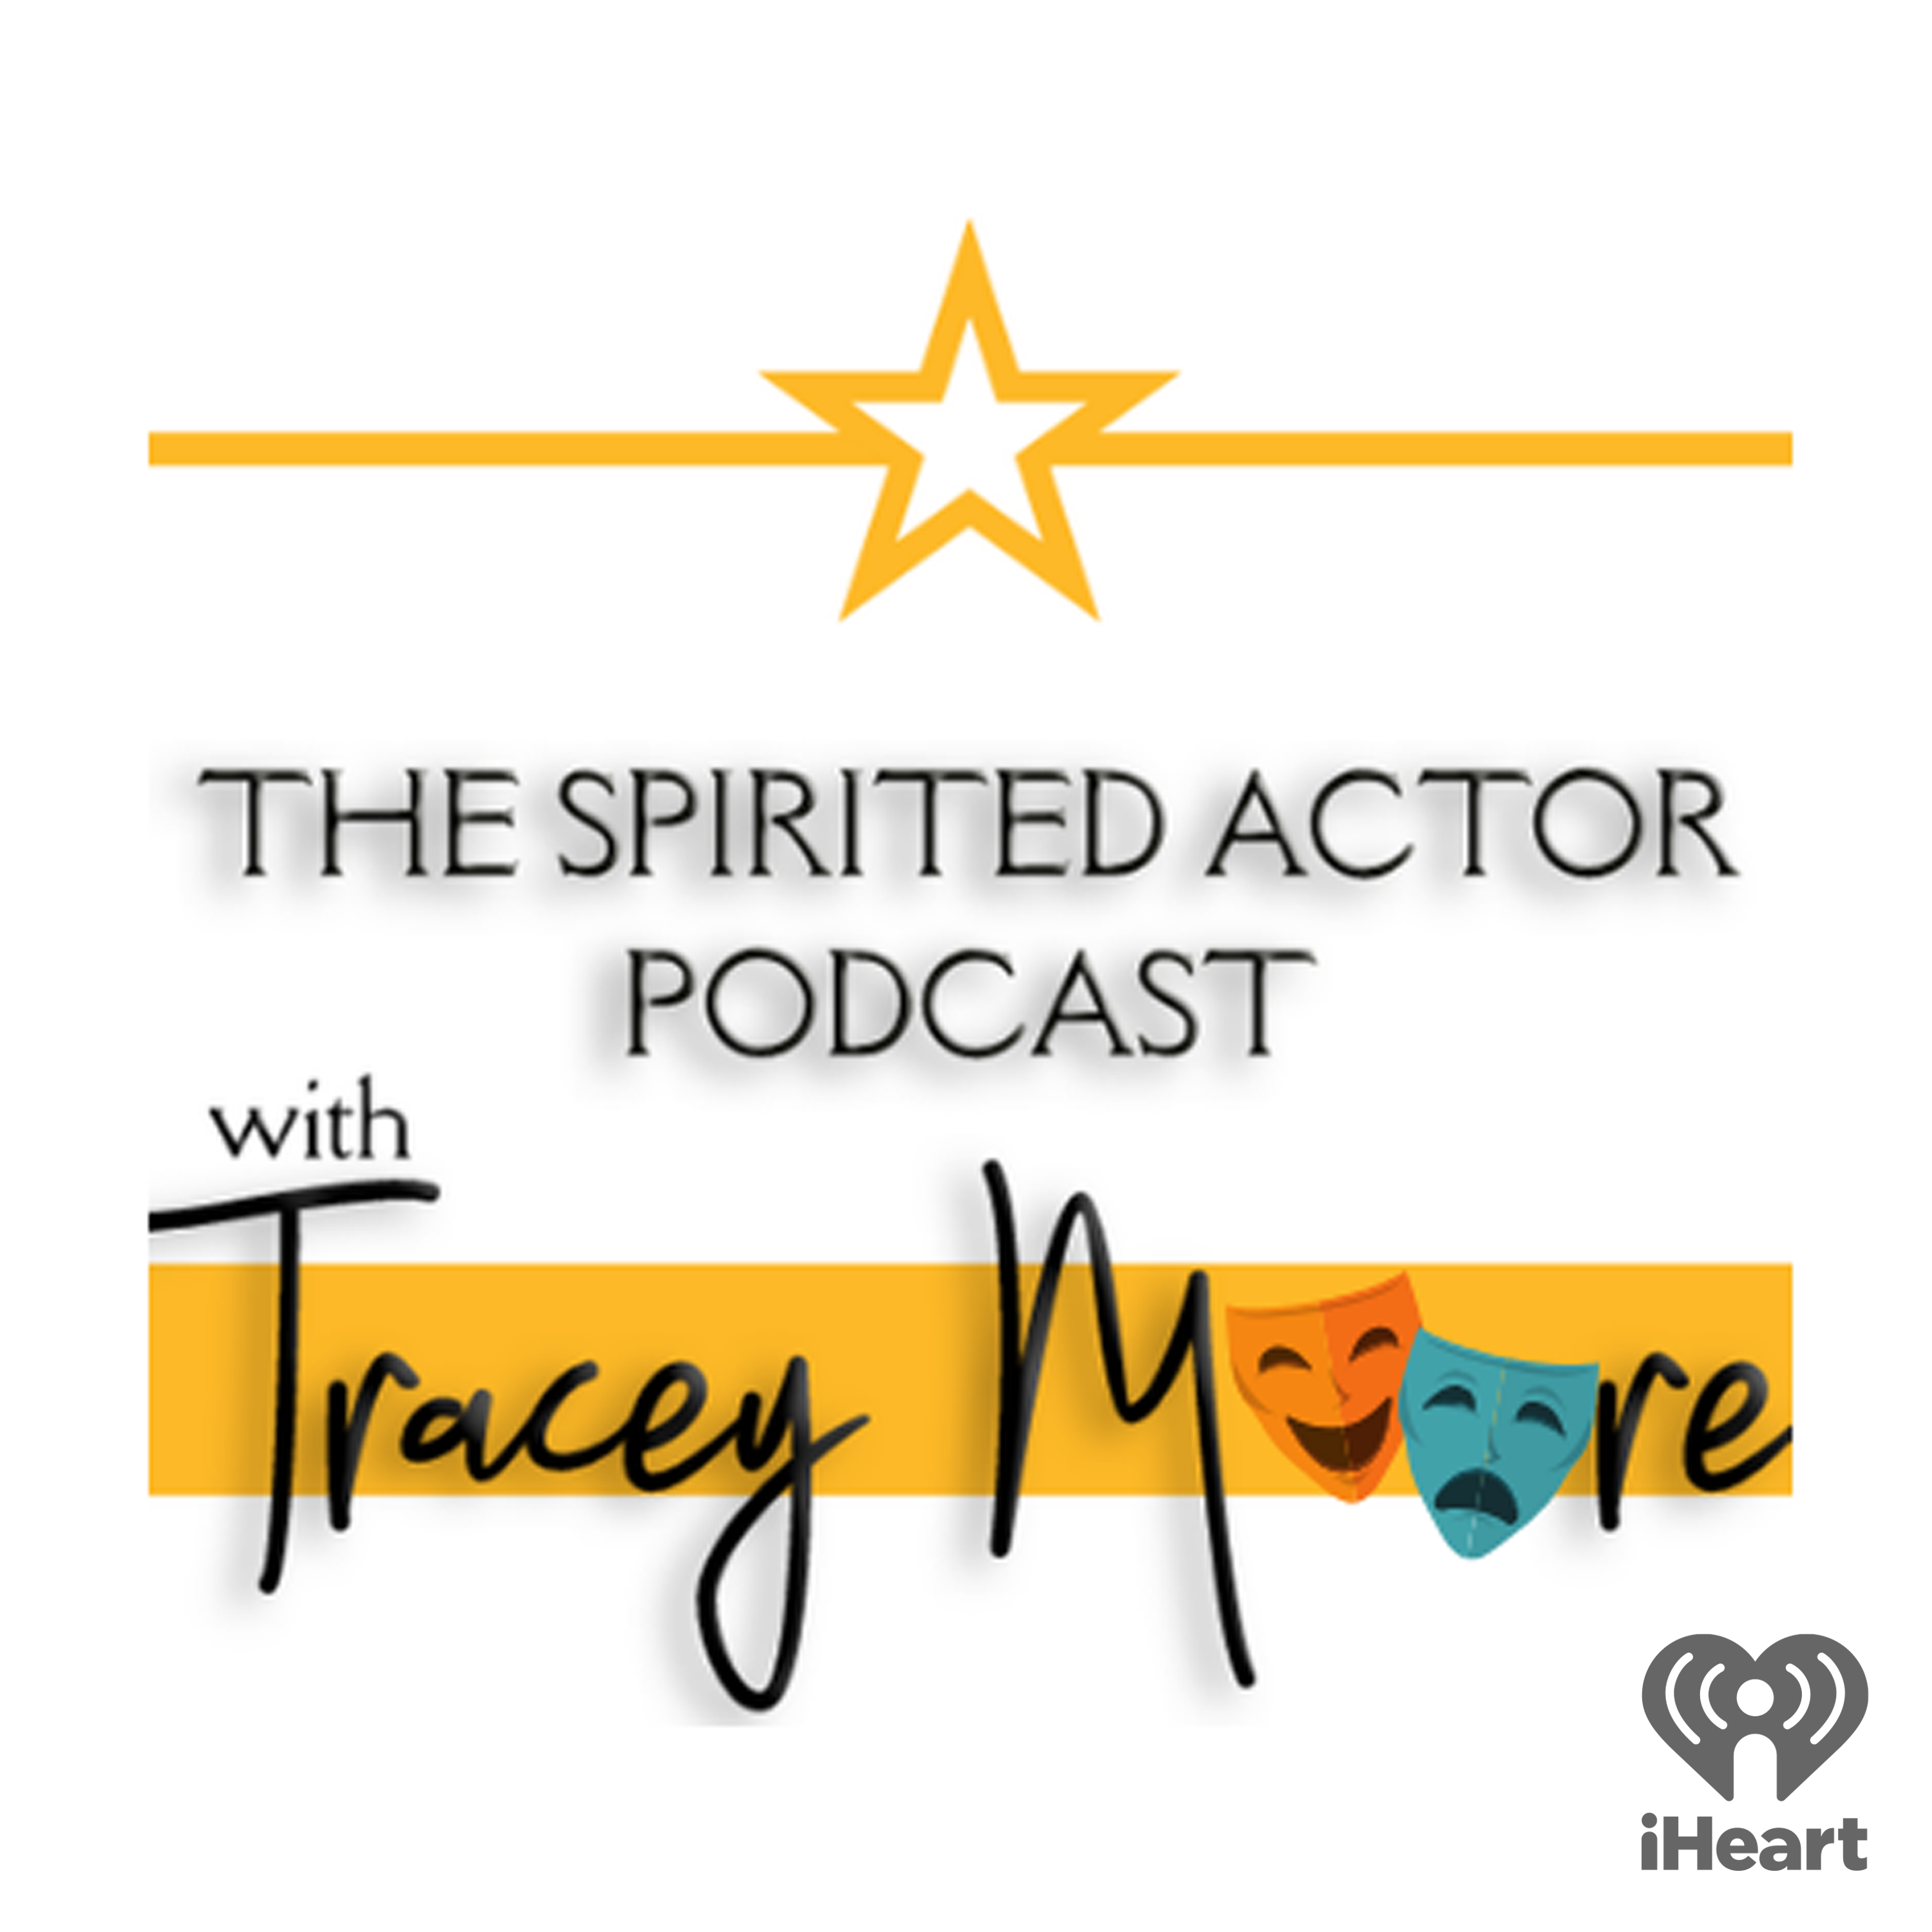 The Spirited Actor - Principles for a Successful Audition pt. 2